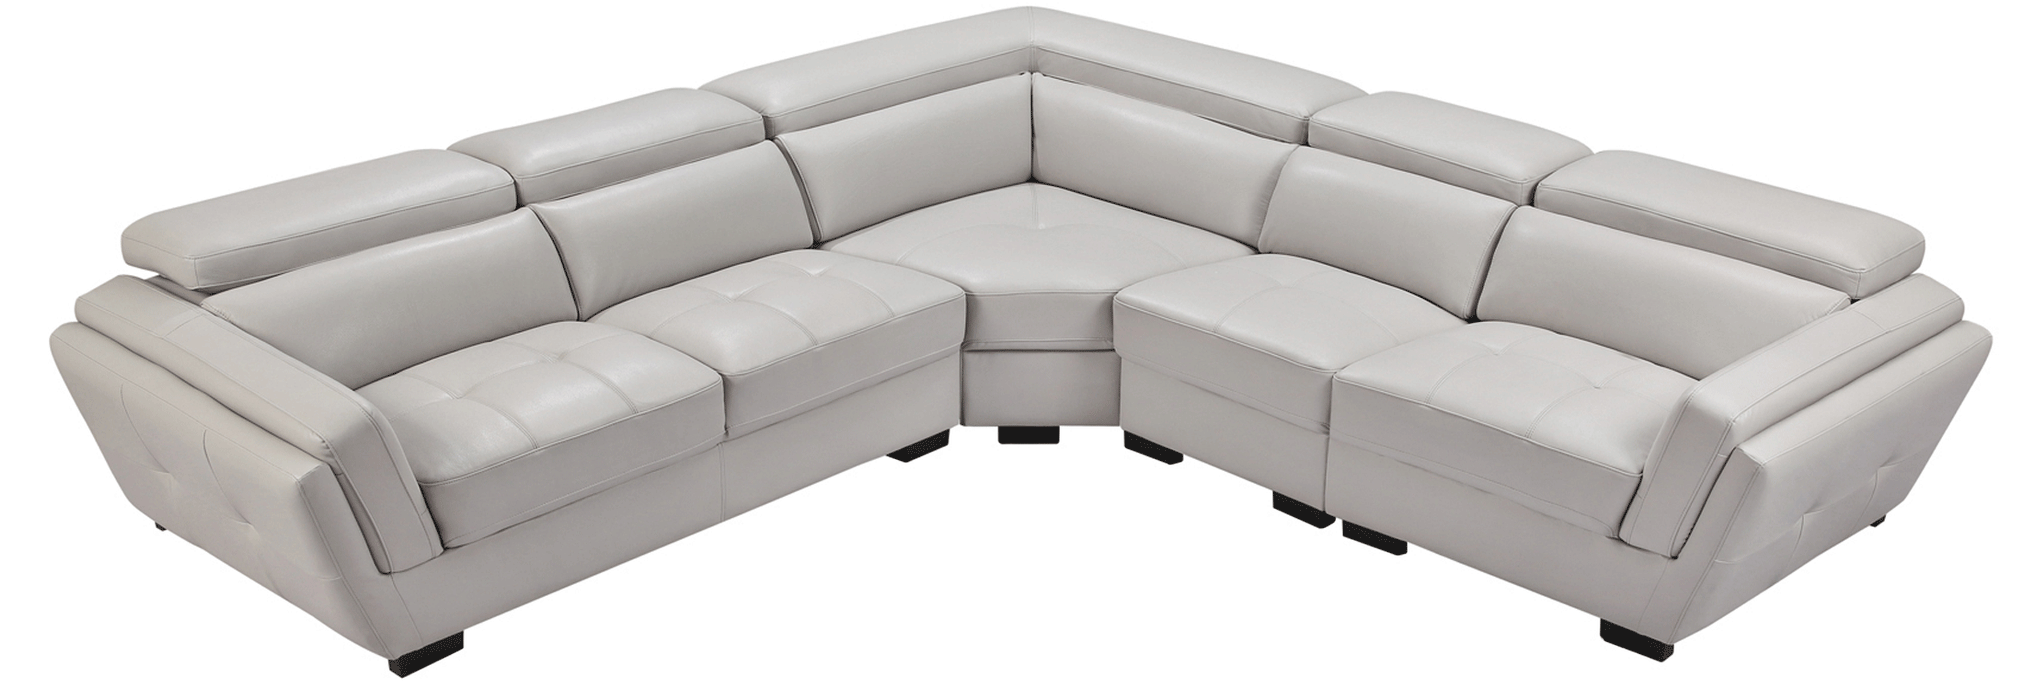 ESF Extravaganza Collection 2566 Sectional i21819